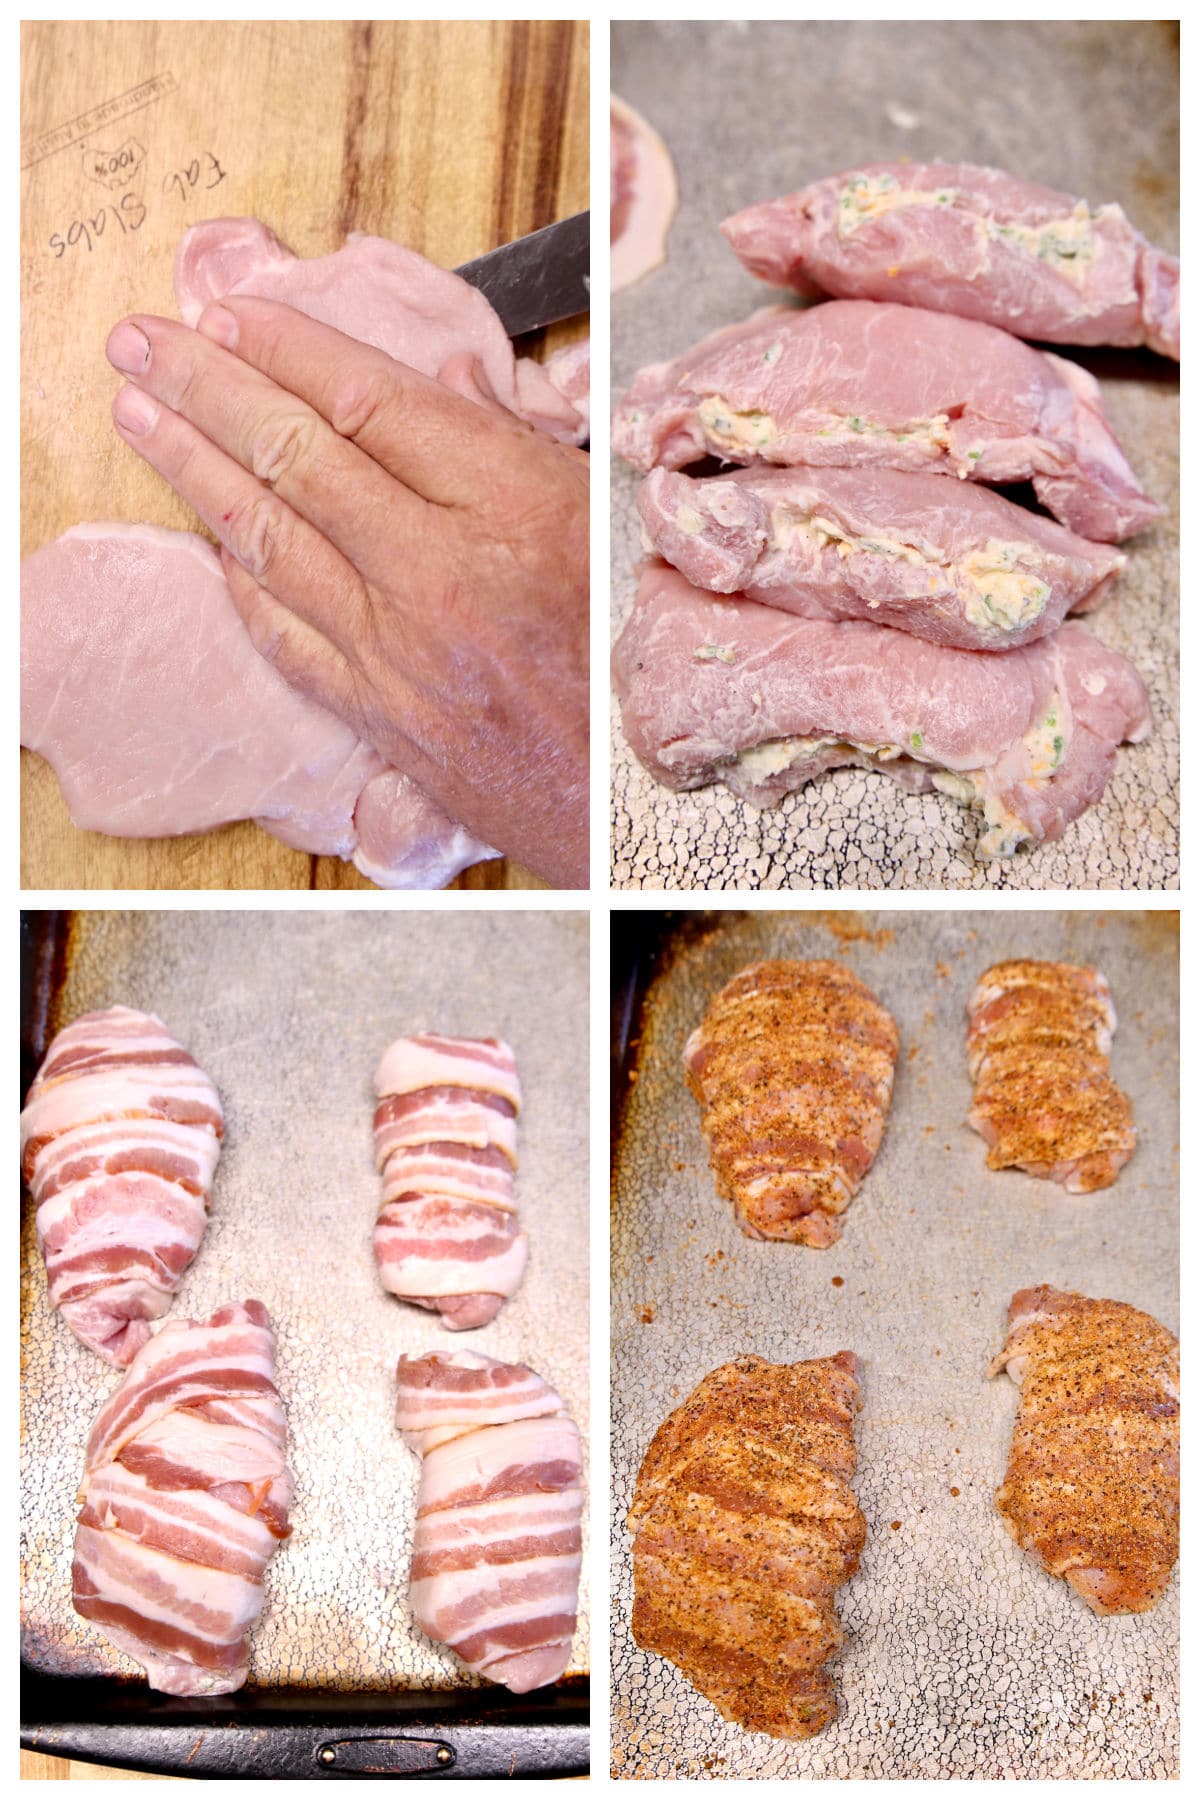 Collage stuffing pork chops, wrapping in bacon.